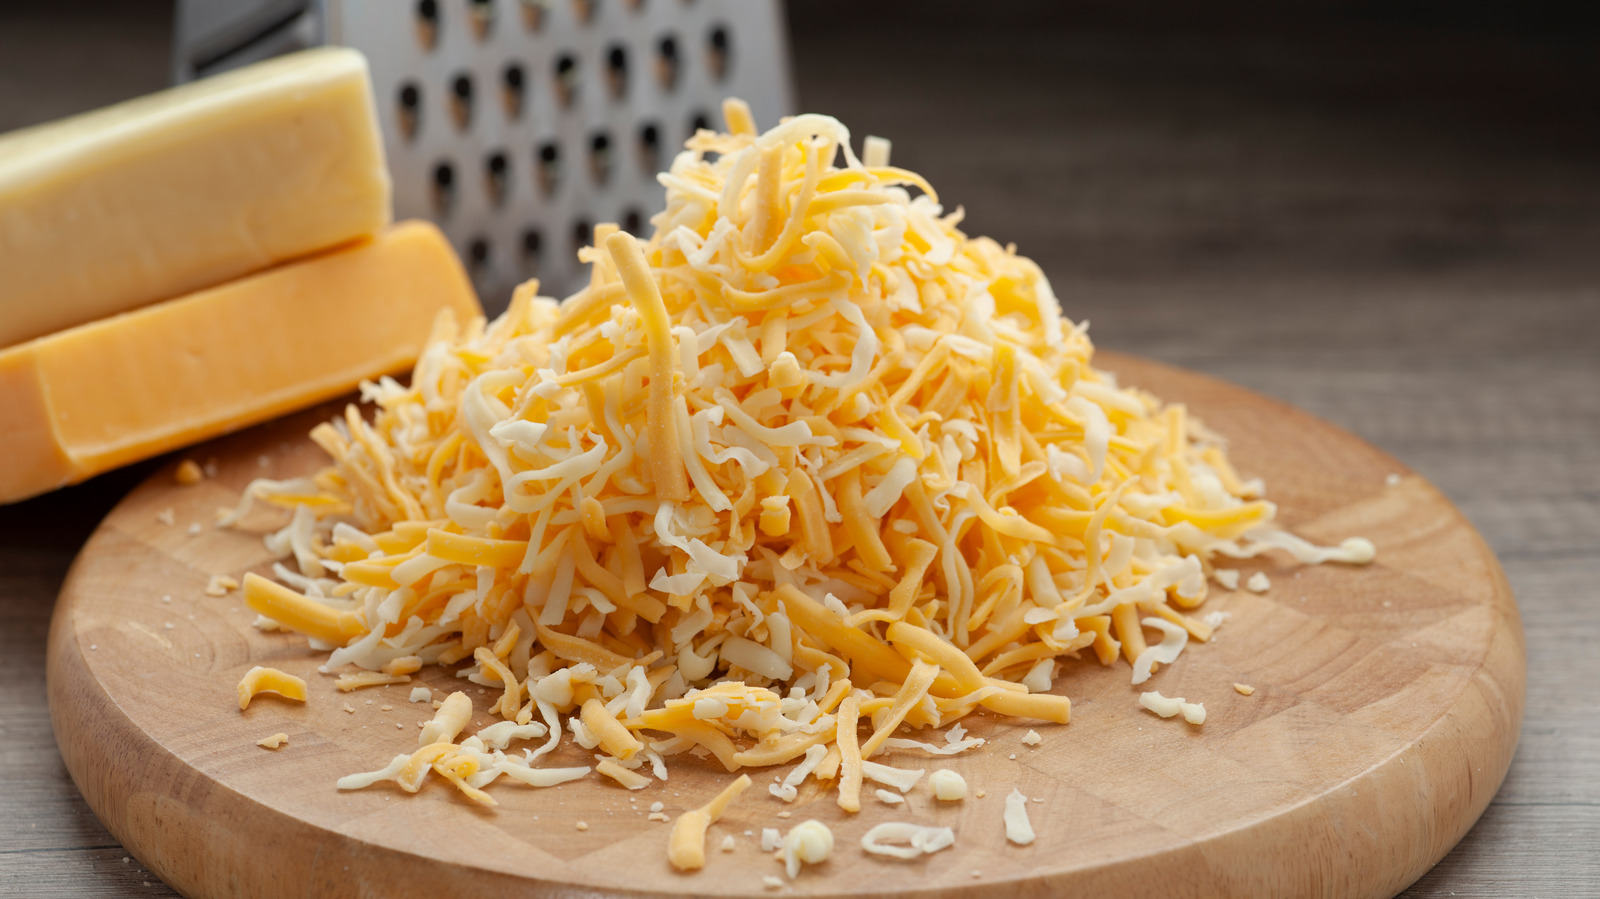 https://www.tastingtable.com/img/gallery/the-simple-trick-to-prevent-a-mess-when-grating-cheese/l-intro-1668638763.jpg